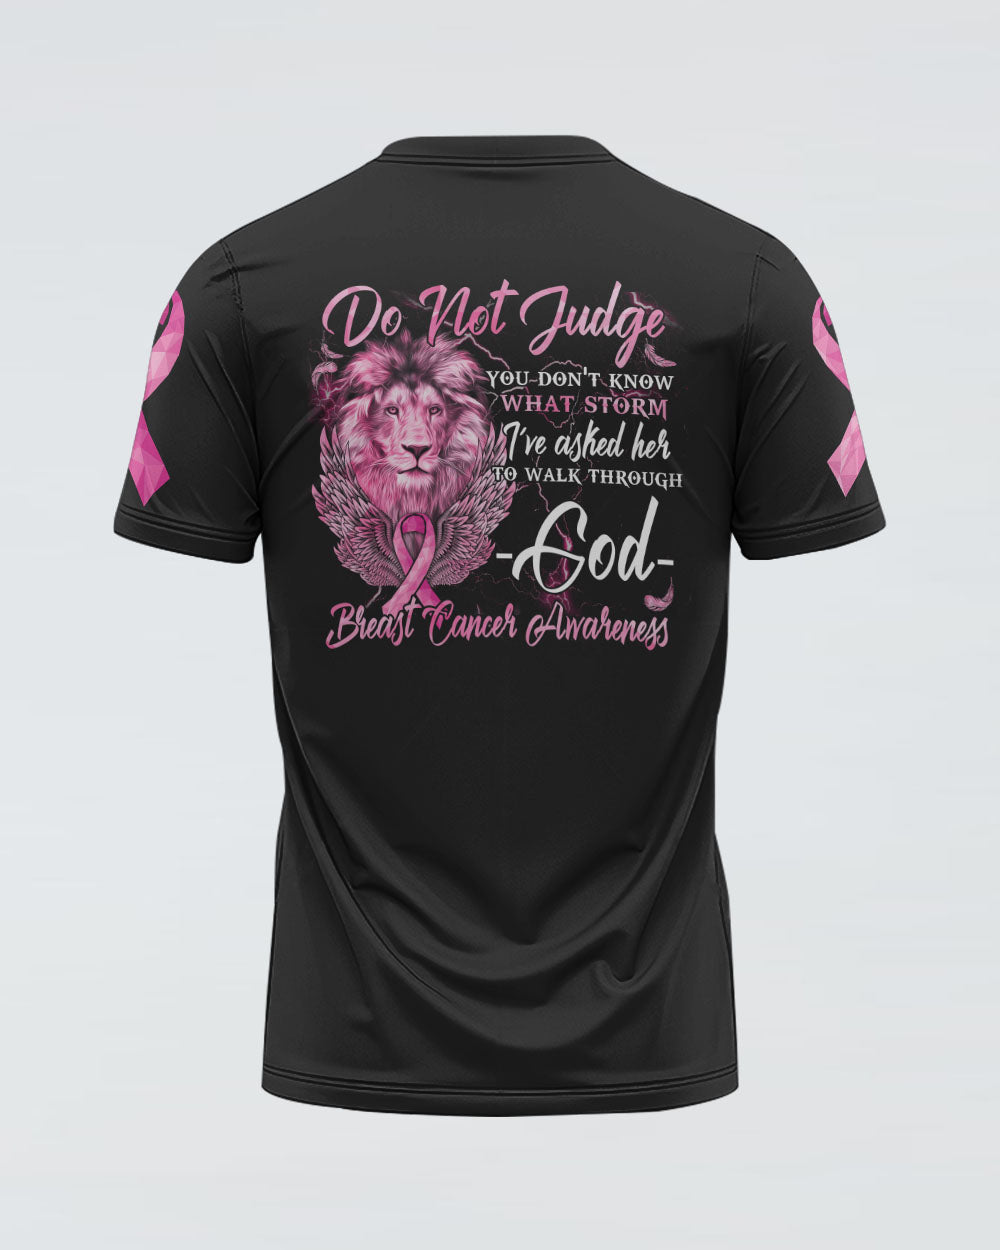 Don't Judge Lion Wings Pink Ribbon Women's Breast Cancer Awareness Tshirt